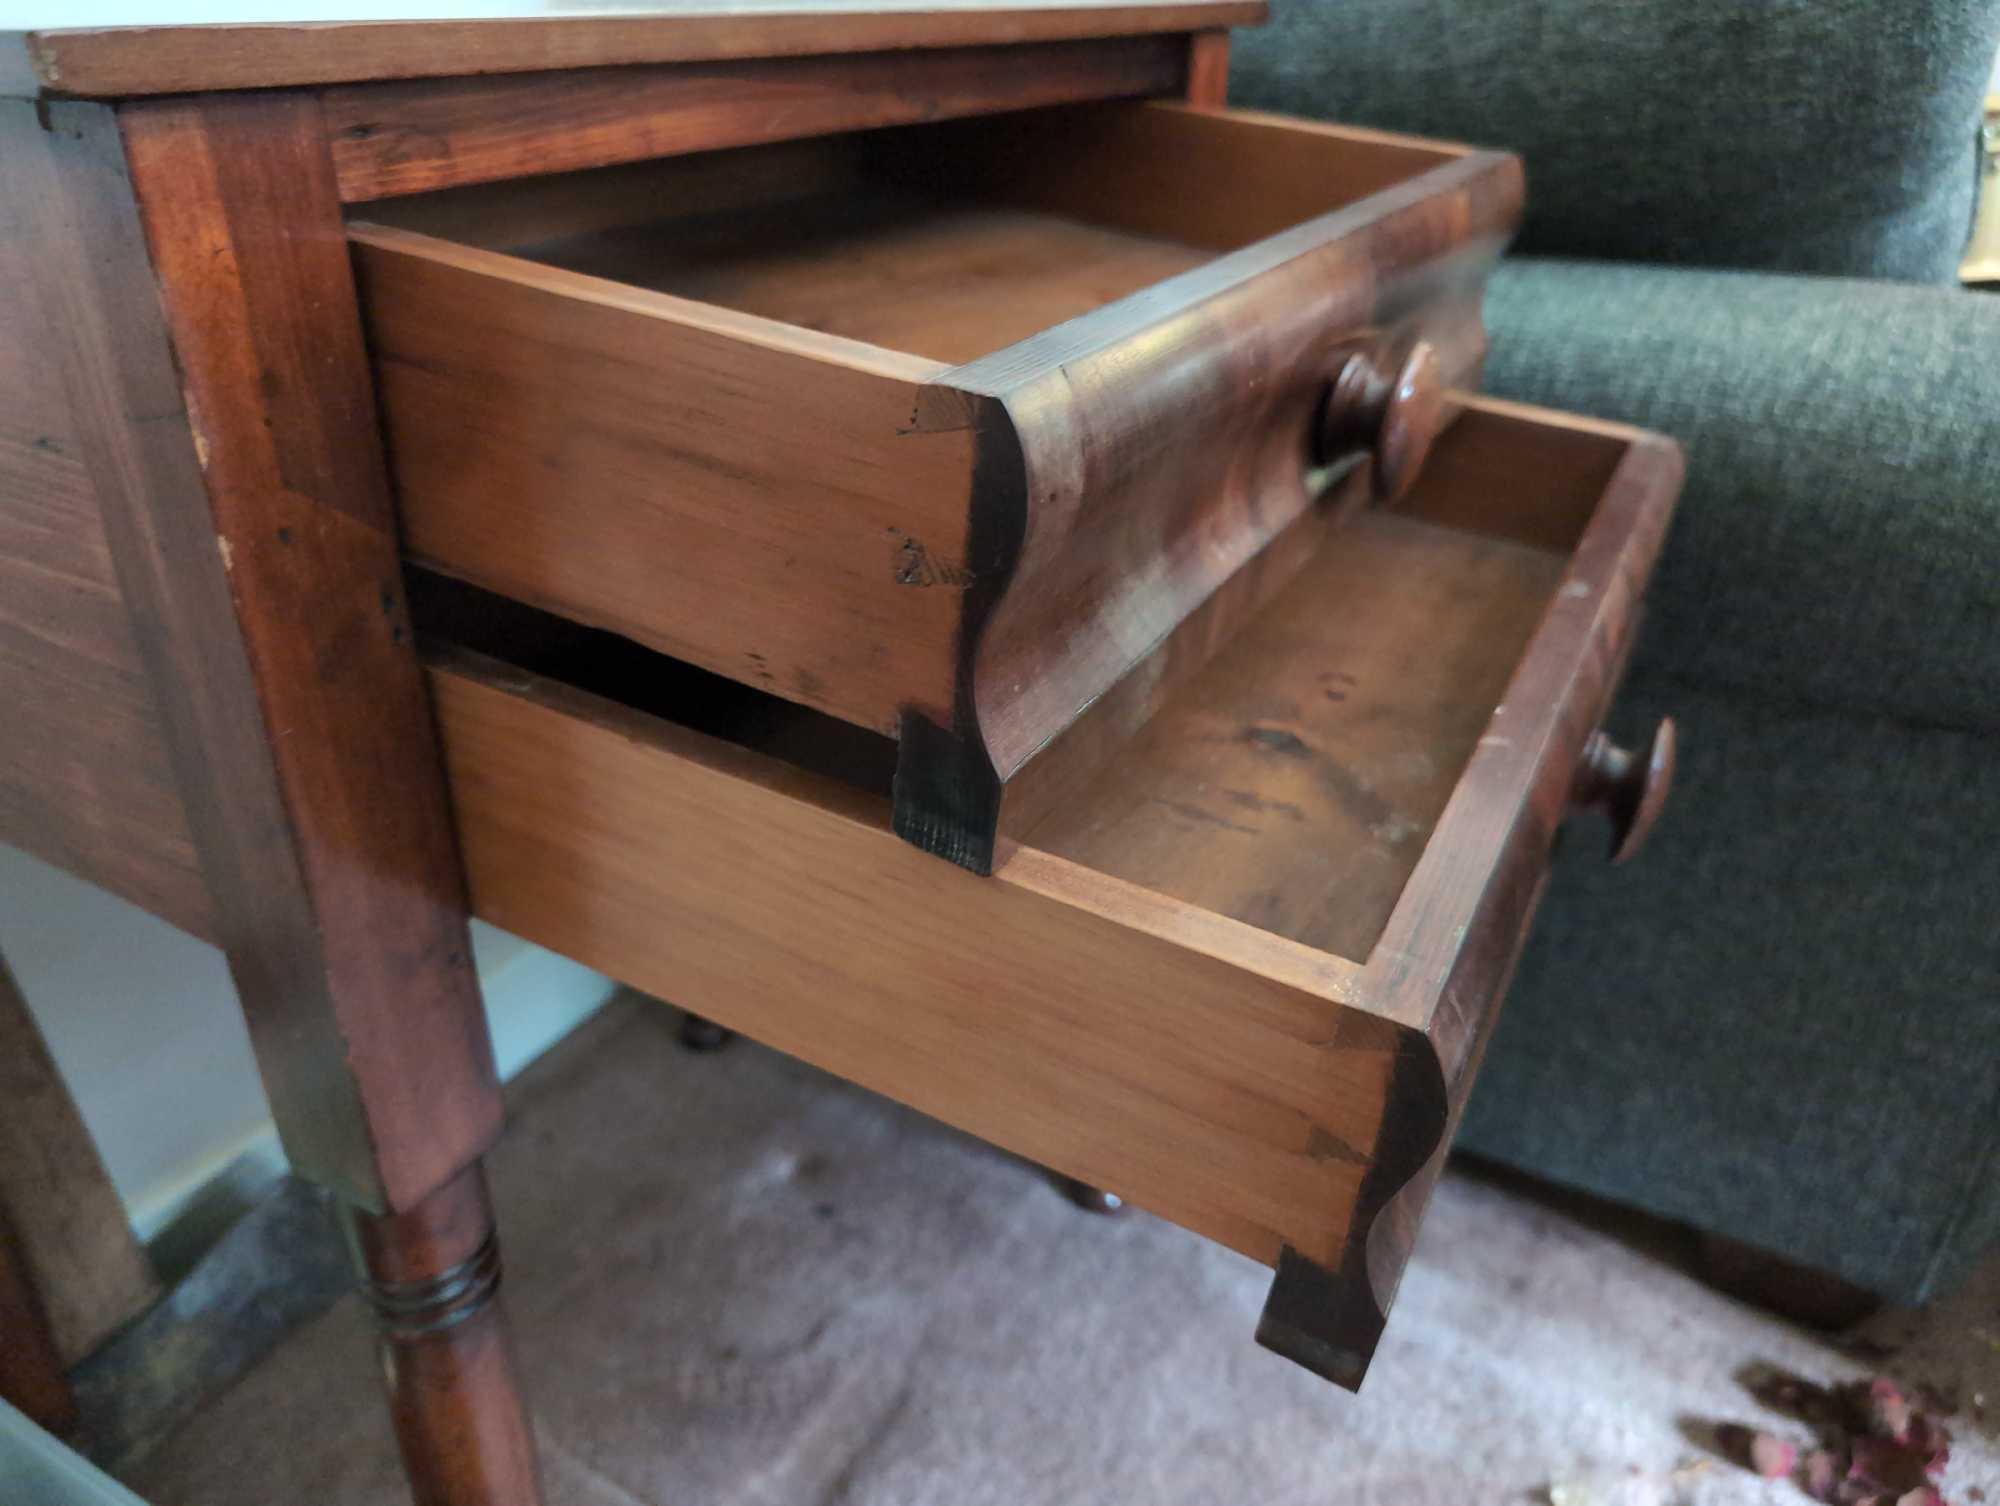 (LR) ANTIQUE SHERATON TWO (DR)AWER SIDE TABLE. KNOB STYLE PULLS, TURNED LEGS, DOVETAILED (DR)AWERS.